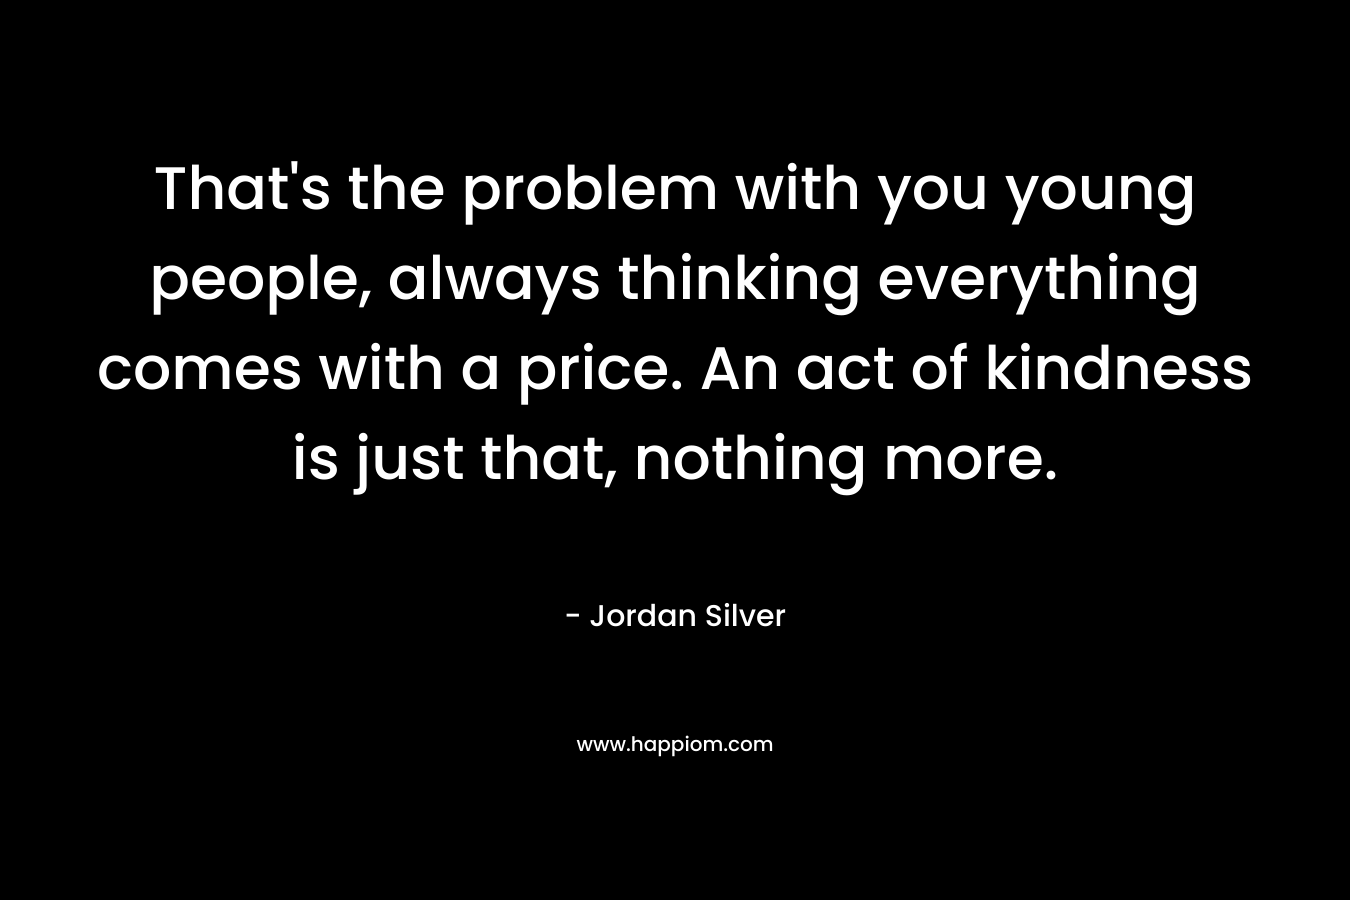 That’s the problem with you young people, always thinking everything comes with a price. An act of kindness is just that, nothing more. – Jordan Silver